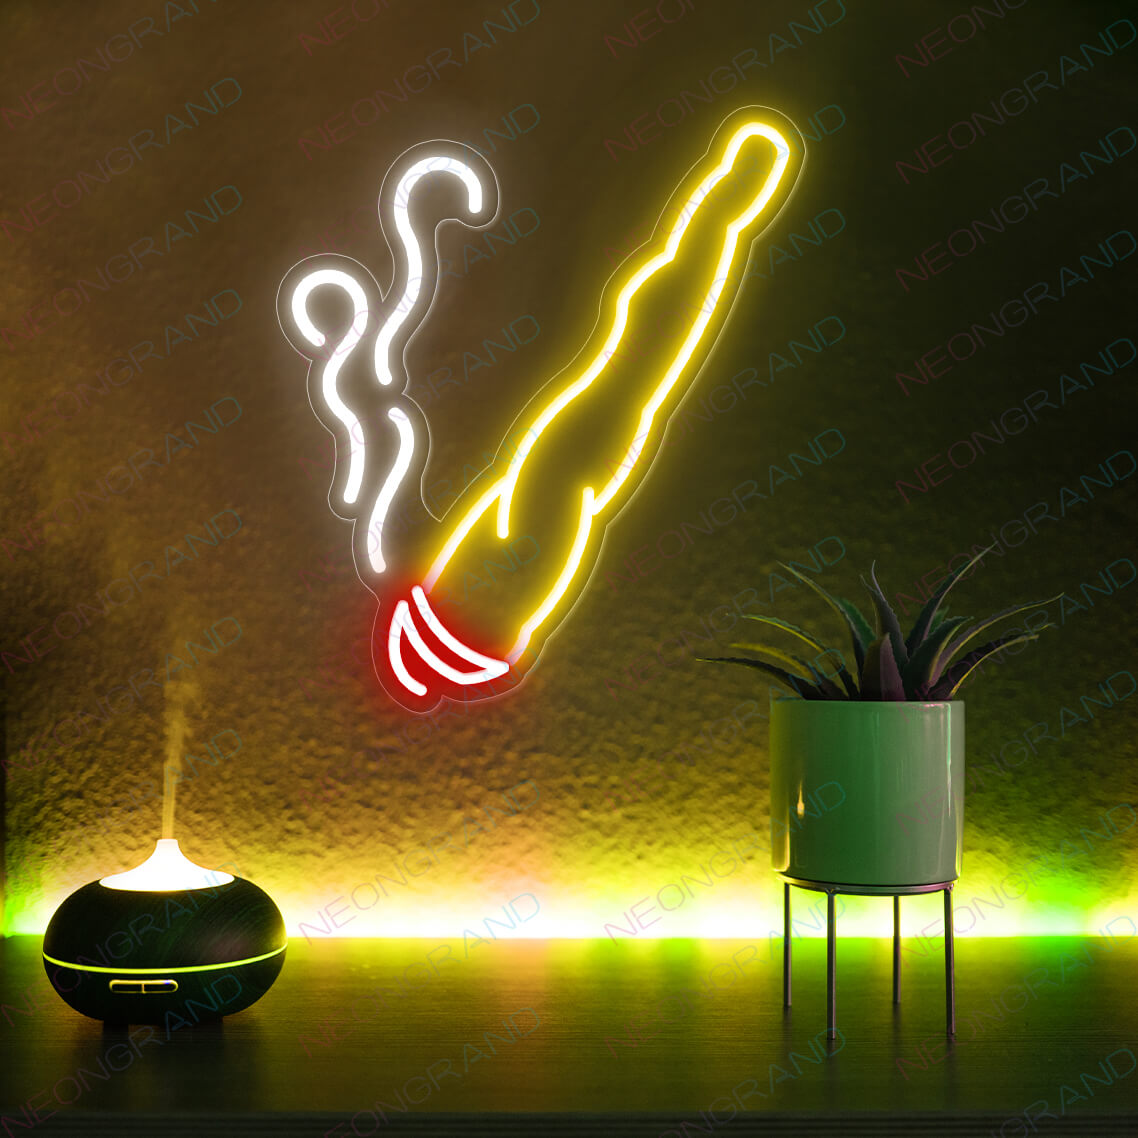 Neon Joint Sign Smoking Weed Led Light 3